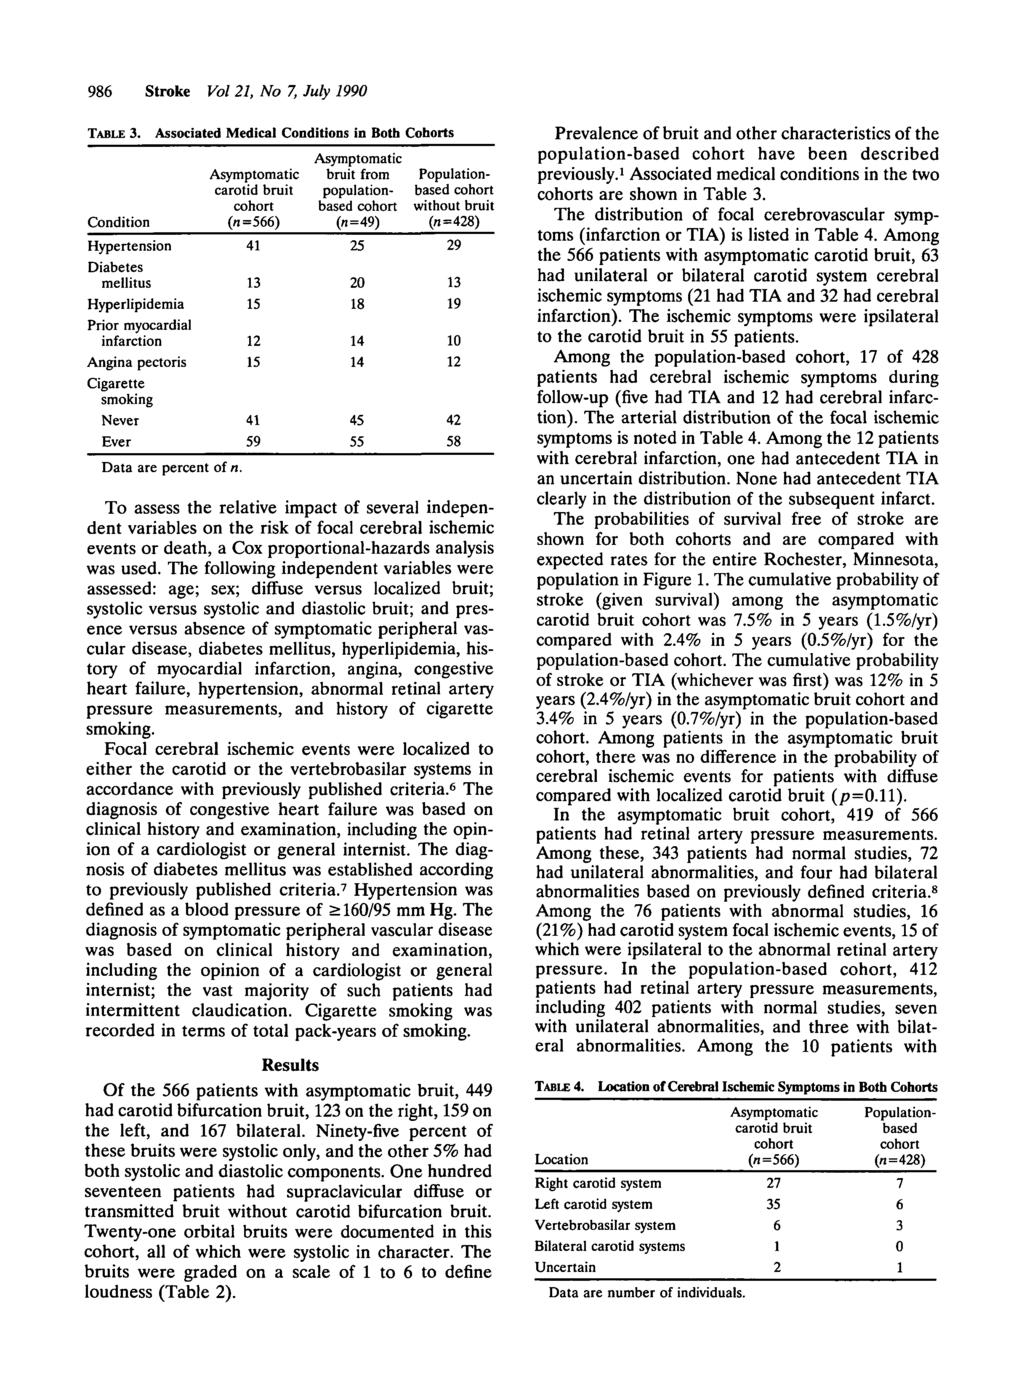 Downloaded from http://ahajournals.org by on January 8, 9 986 Stroke Vol, No 7, July 99 TABLE 3.